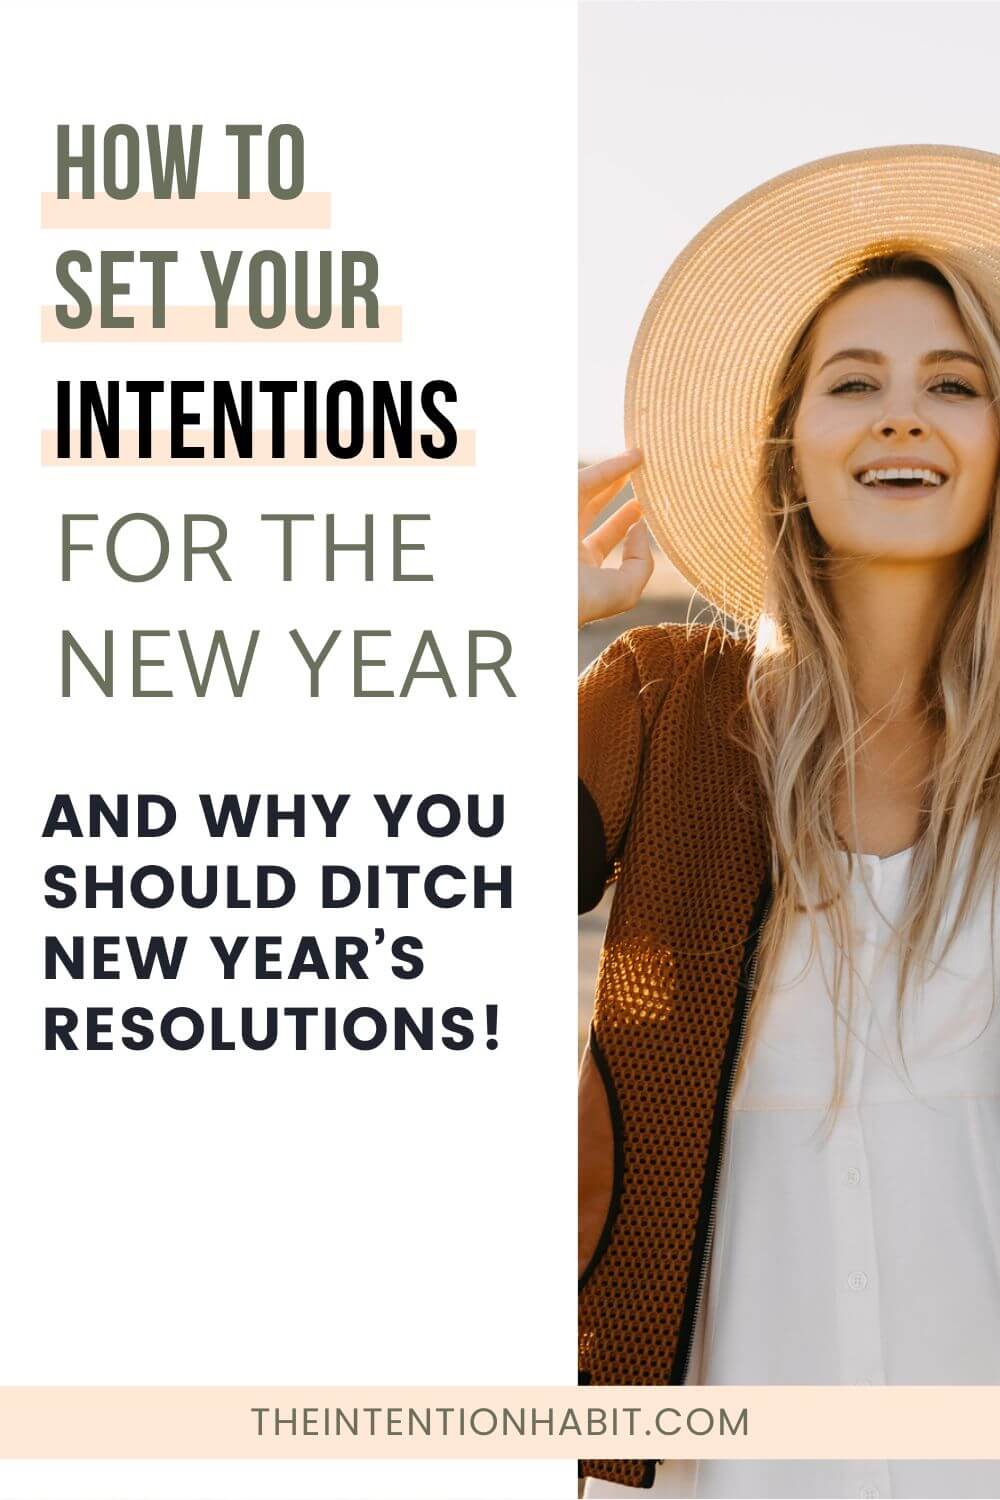 how to set up your intentions for the new year and why you should ditch new year's resolutions.